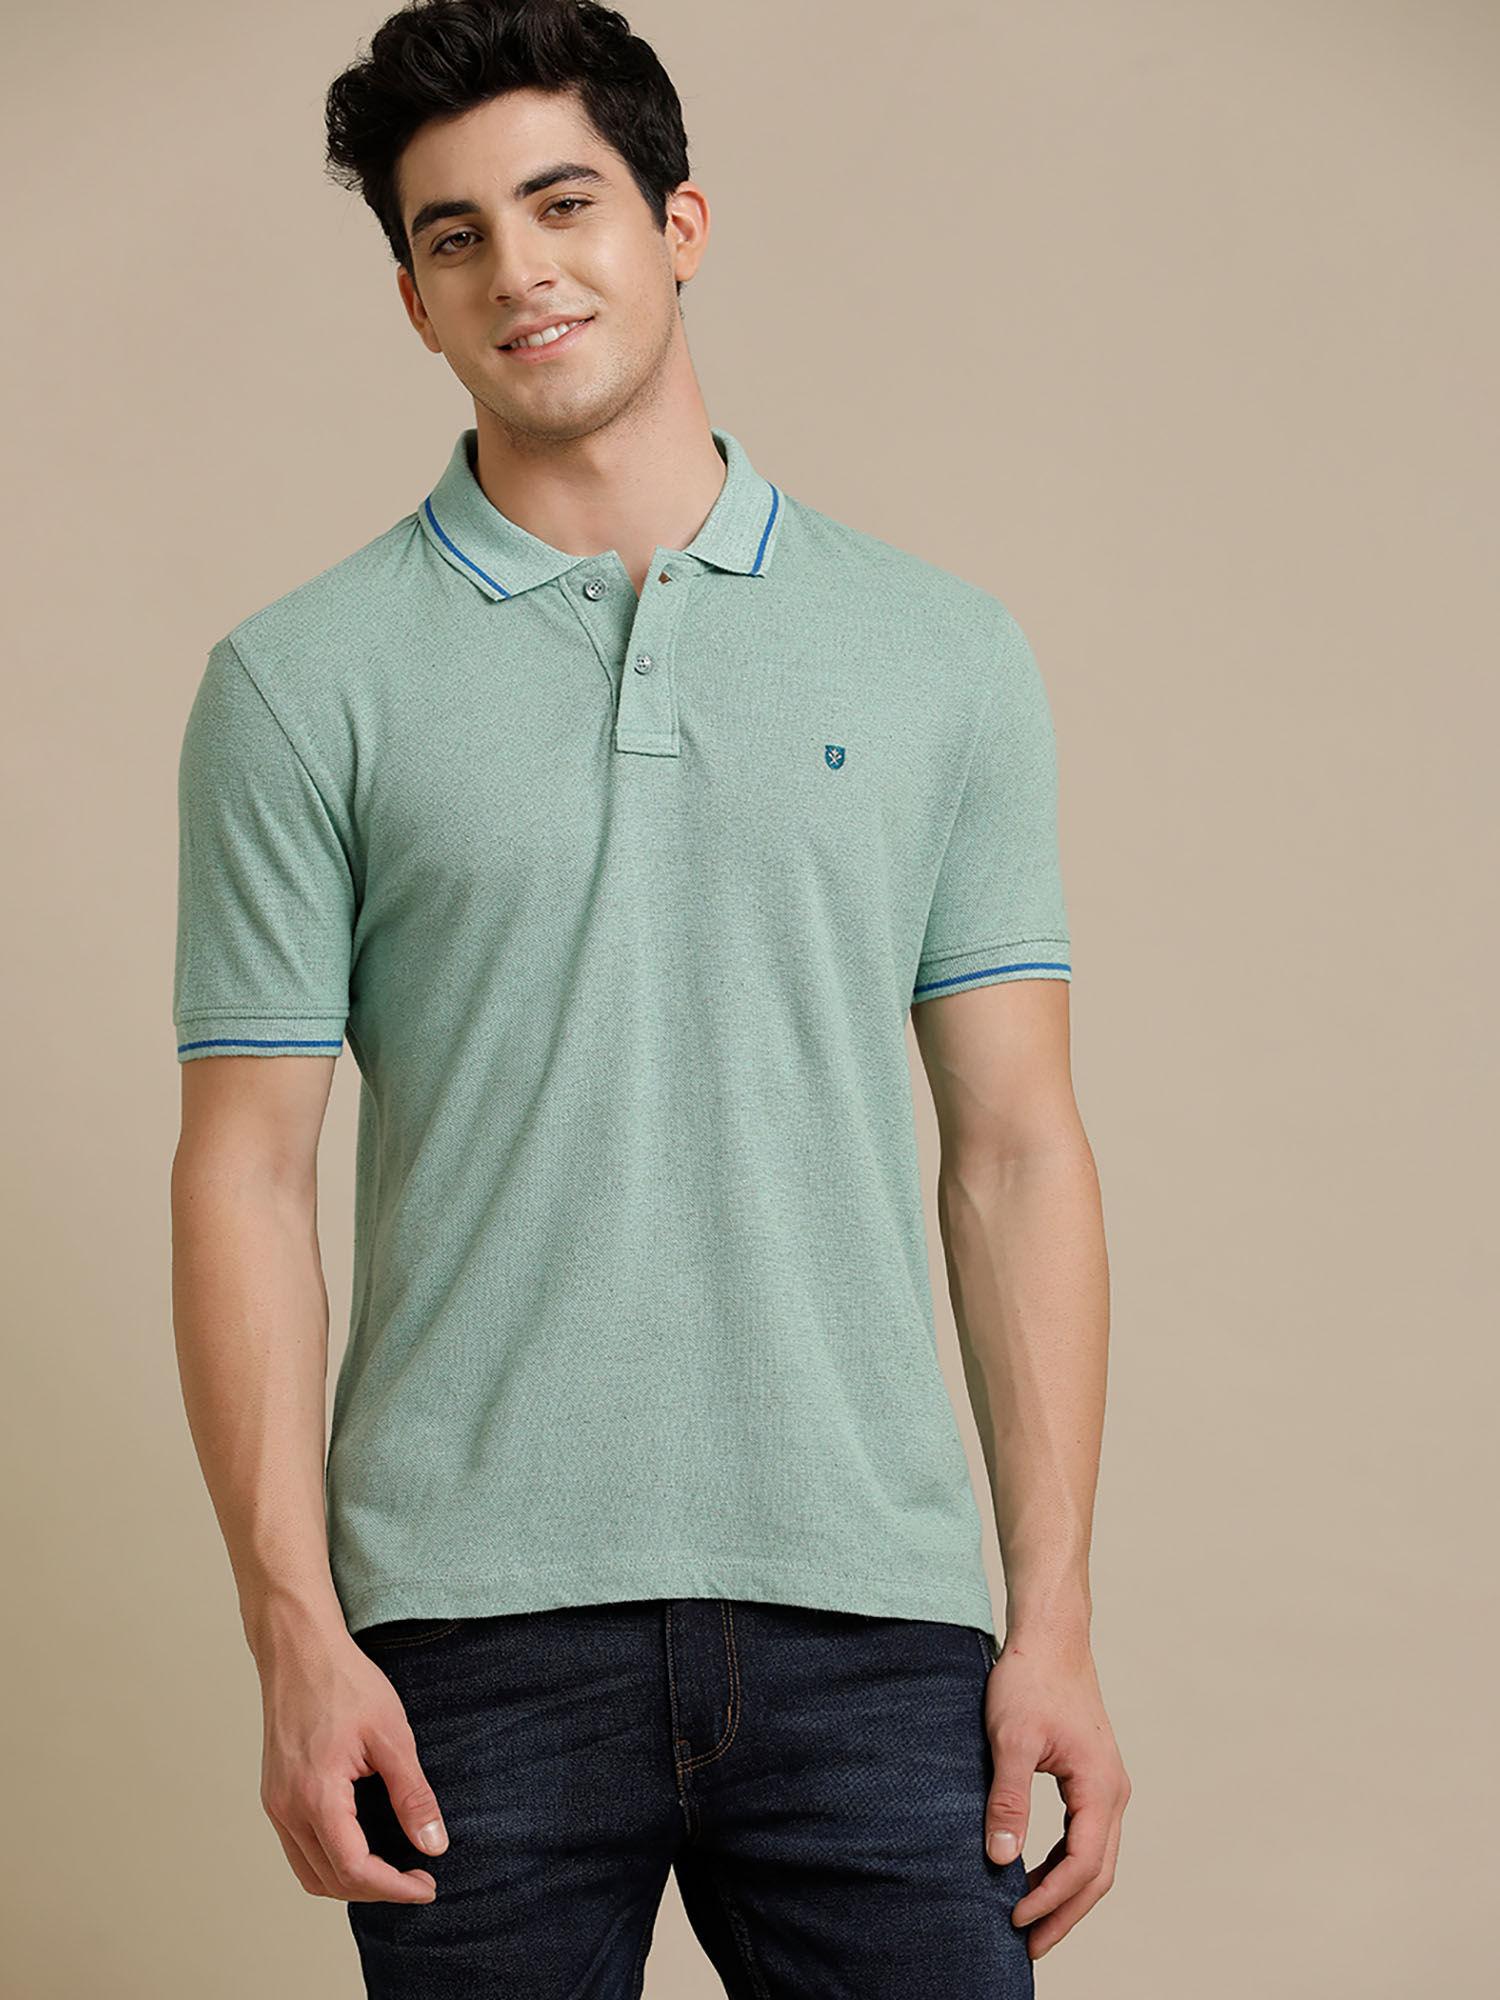 circular knit polo neck green solid half sleeve t-shirt for men